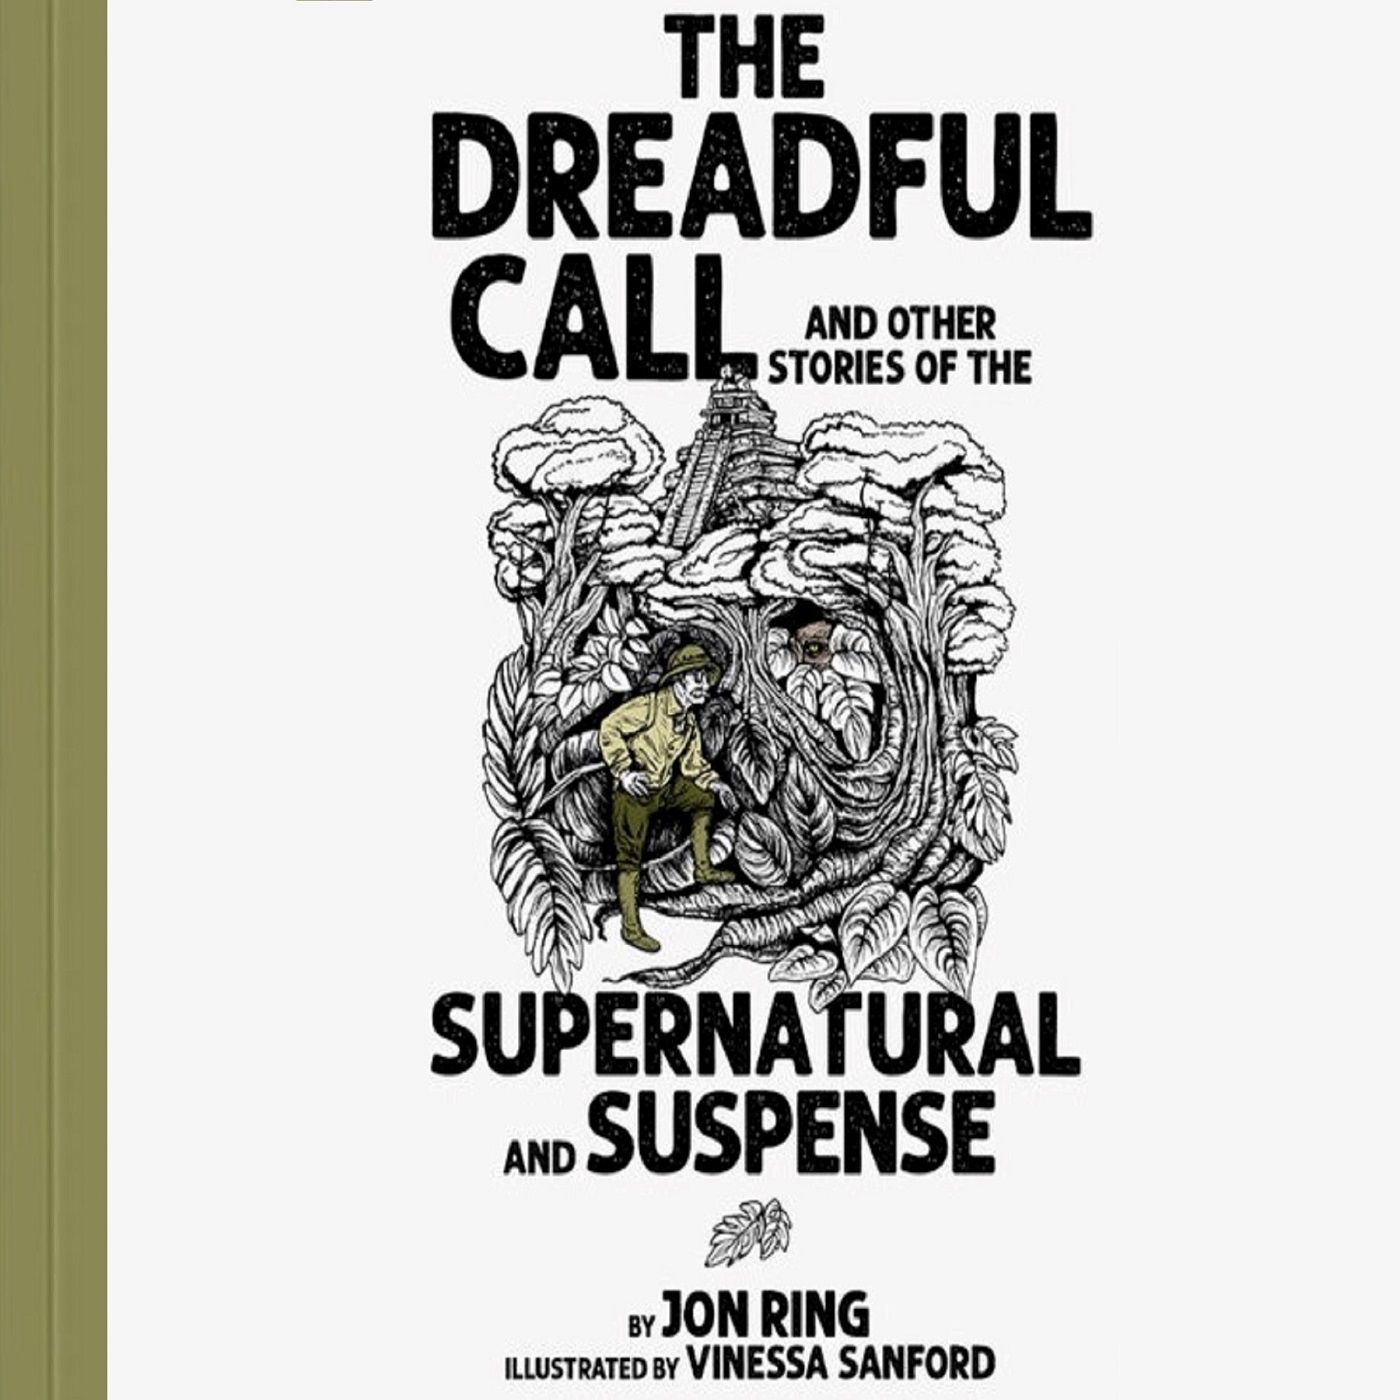 Dreadful Call And Other Stories of the Supernatural and Suspense by Jon Ring ch2